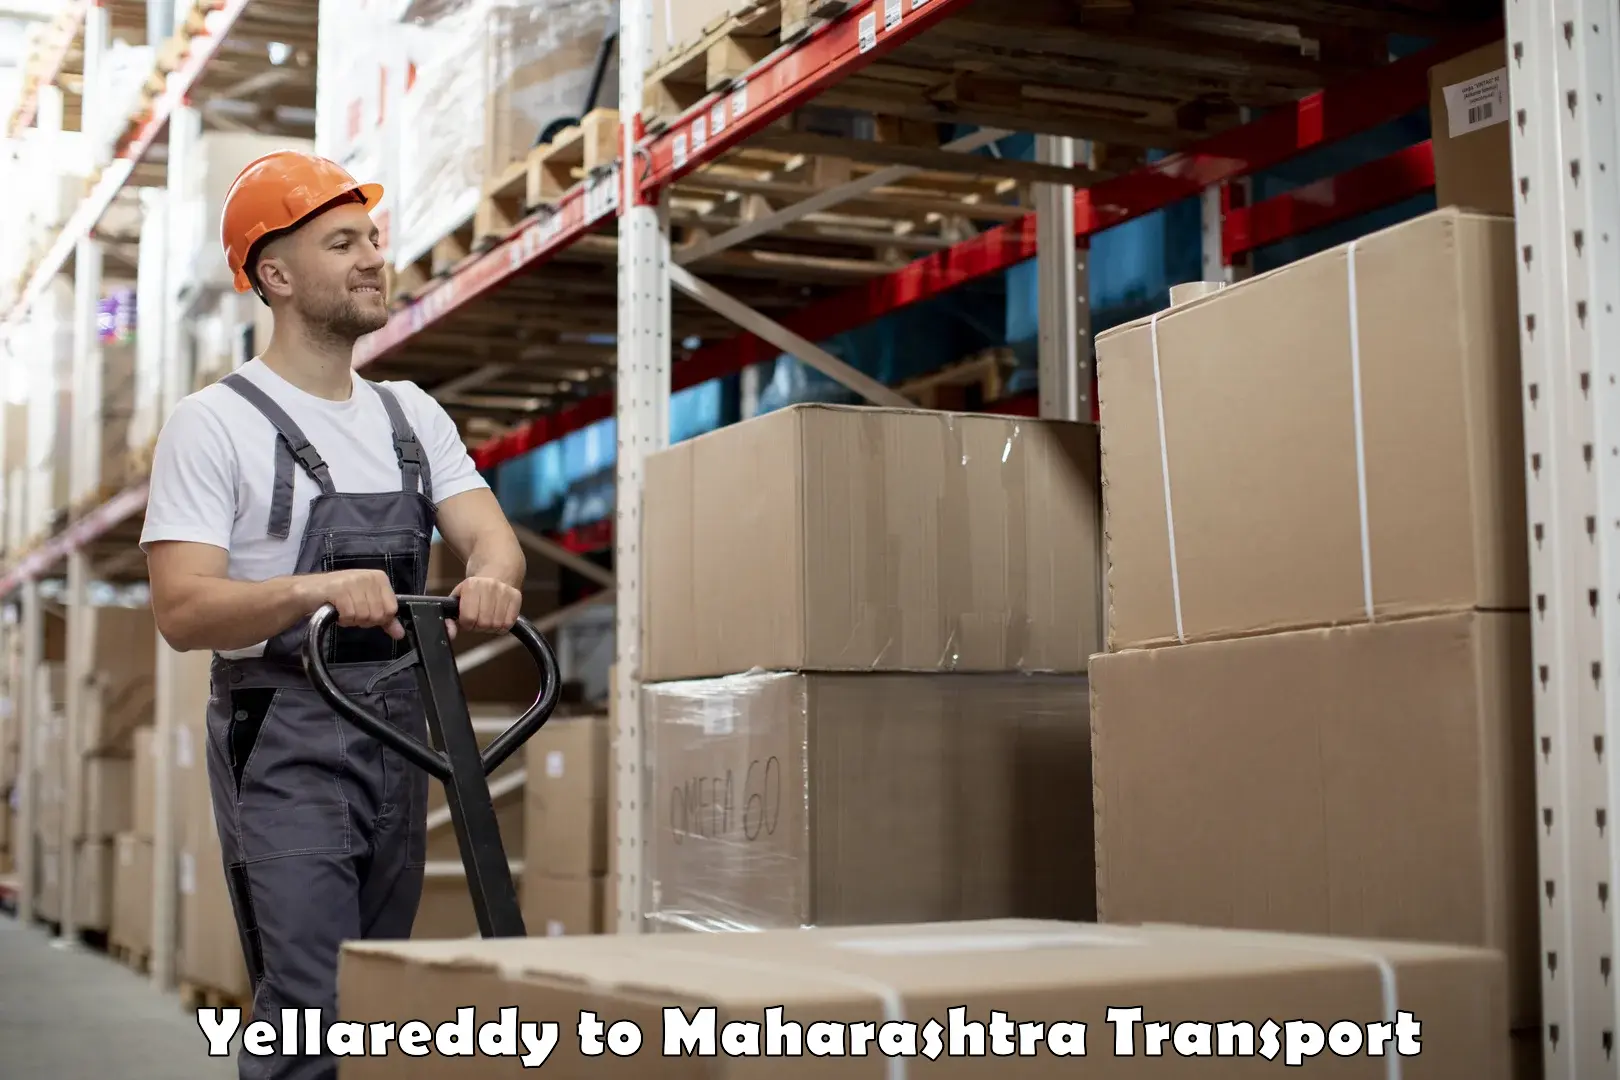 Part load transport service in India Yellareddy to Pune